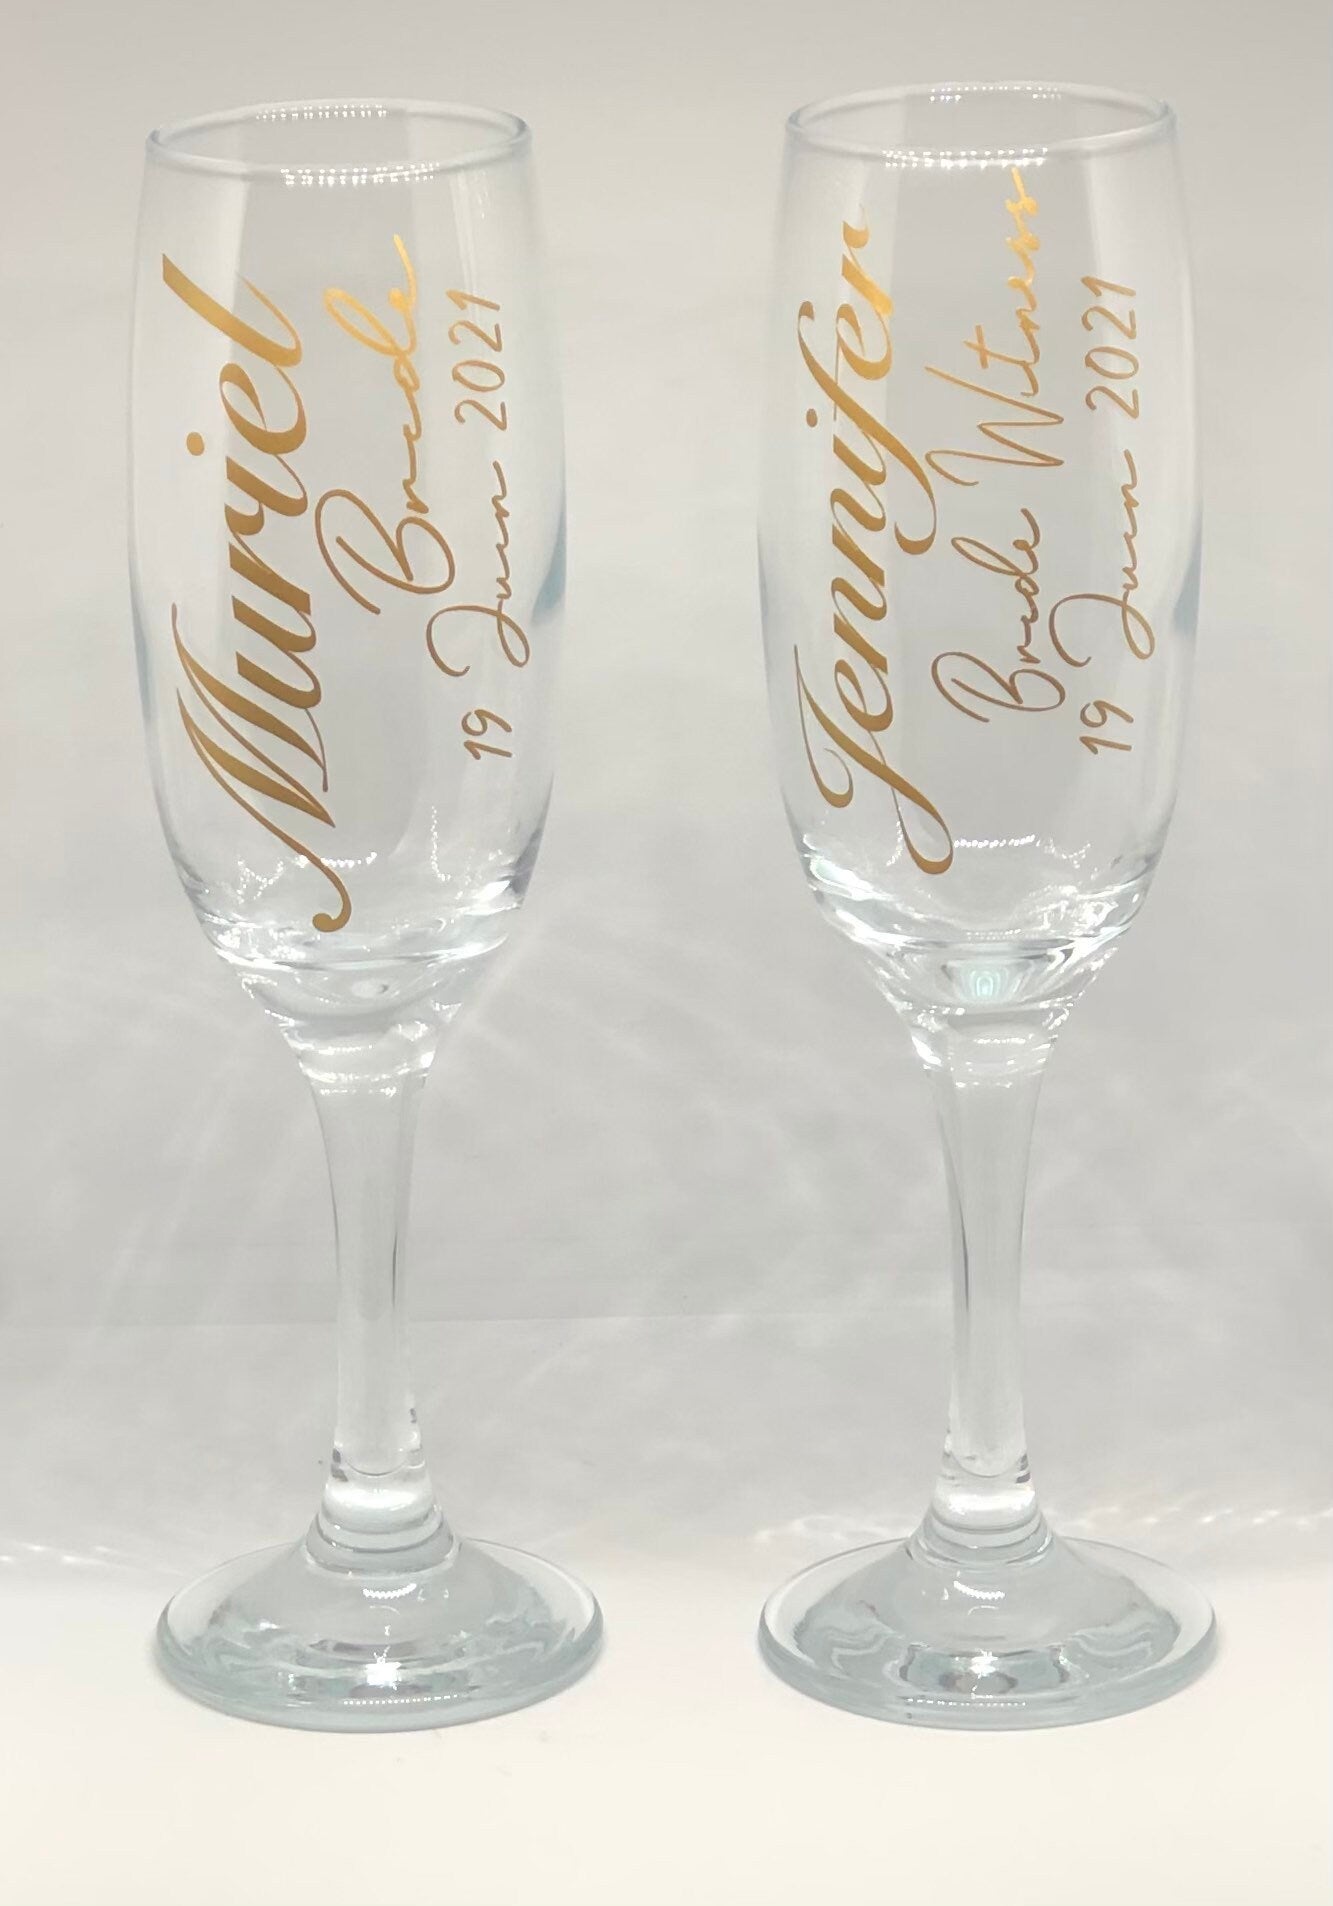 Personalized glass champagne glass for your events